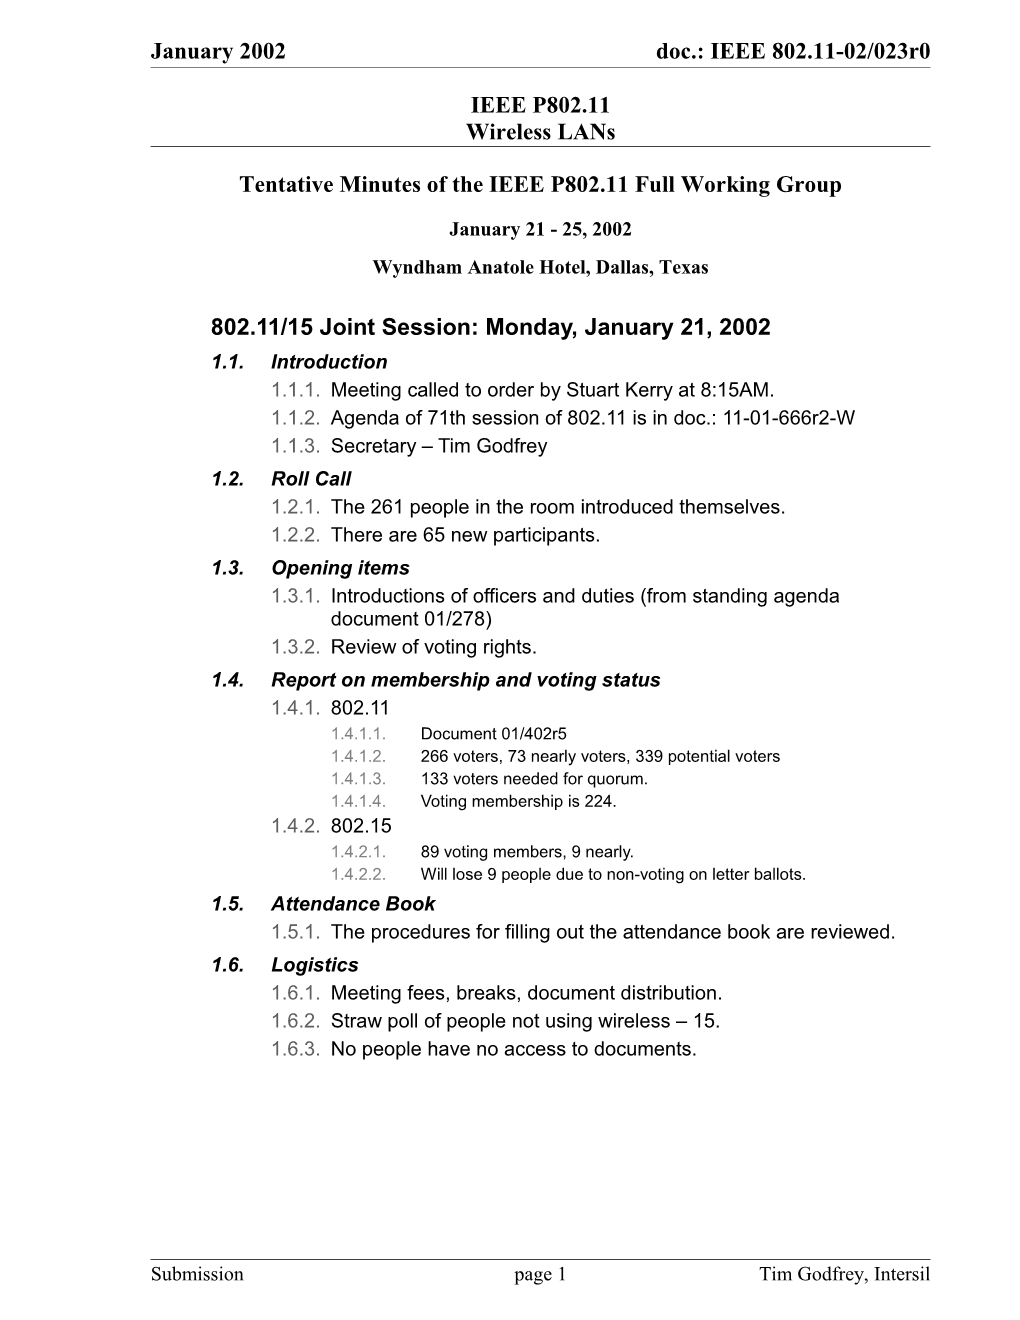 Tentative Minutes of the IEEE P802.11 Full Working Group